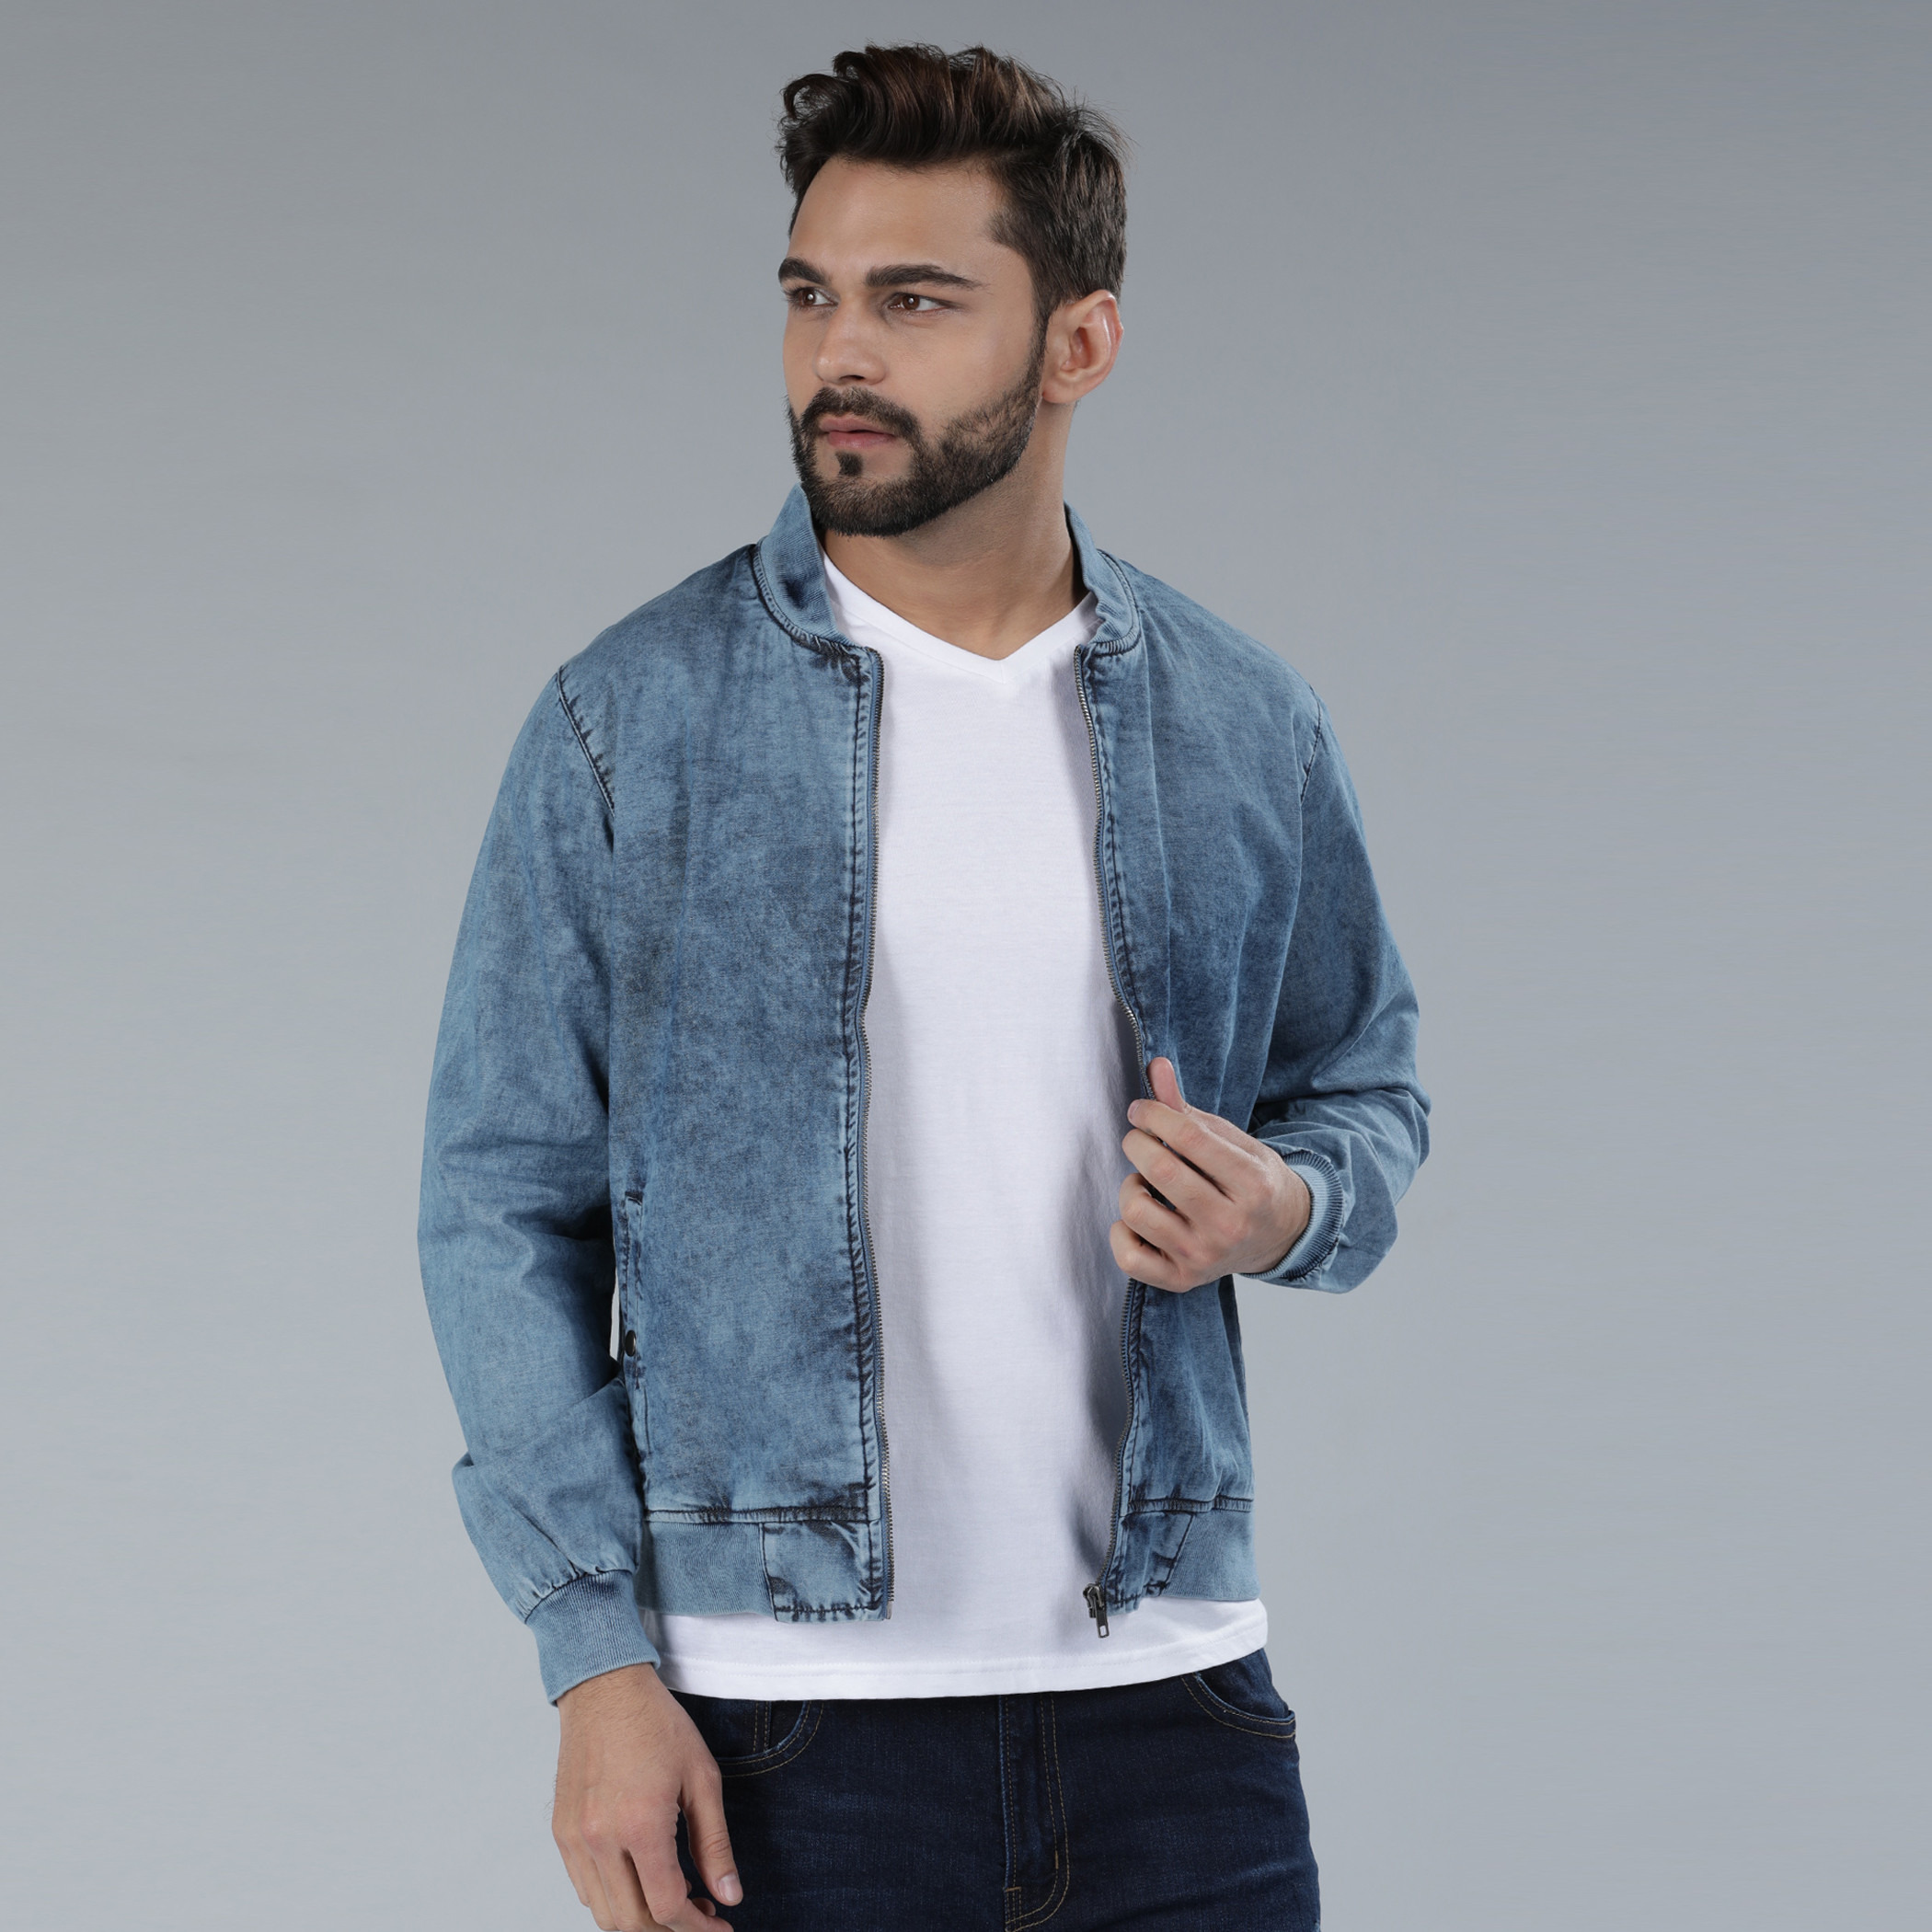 How To Style A Bomber Jacket With Jeans - An Indigo Day